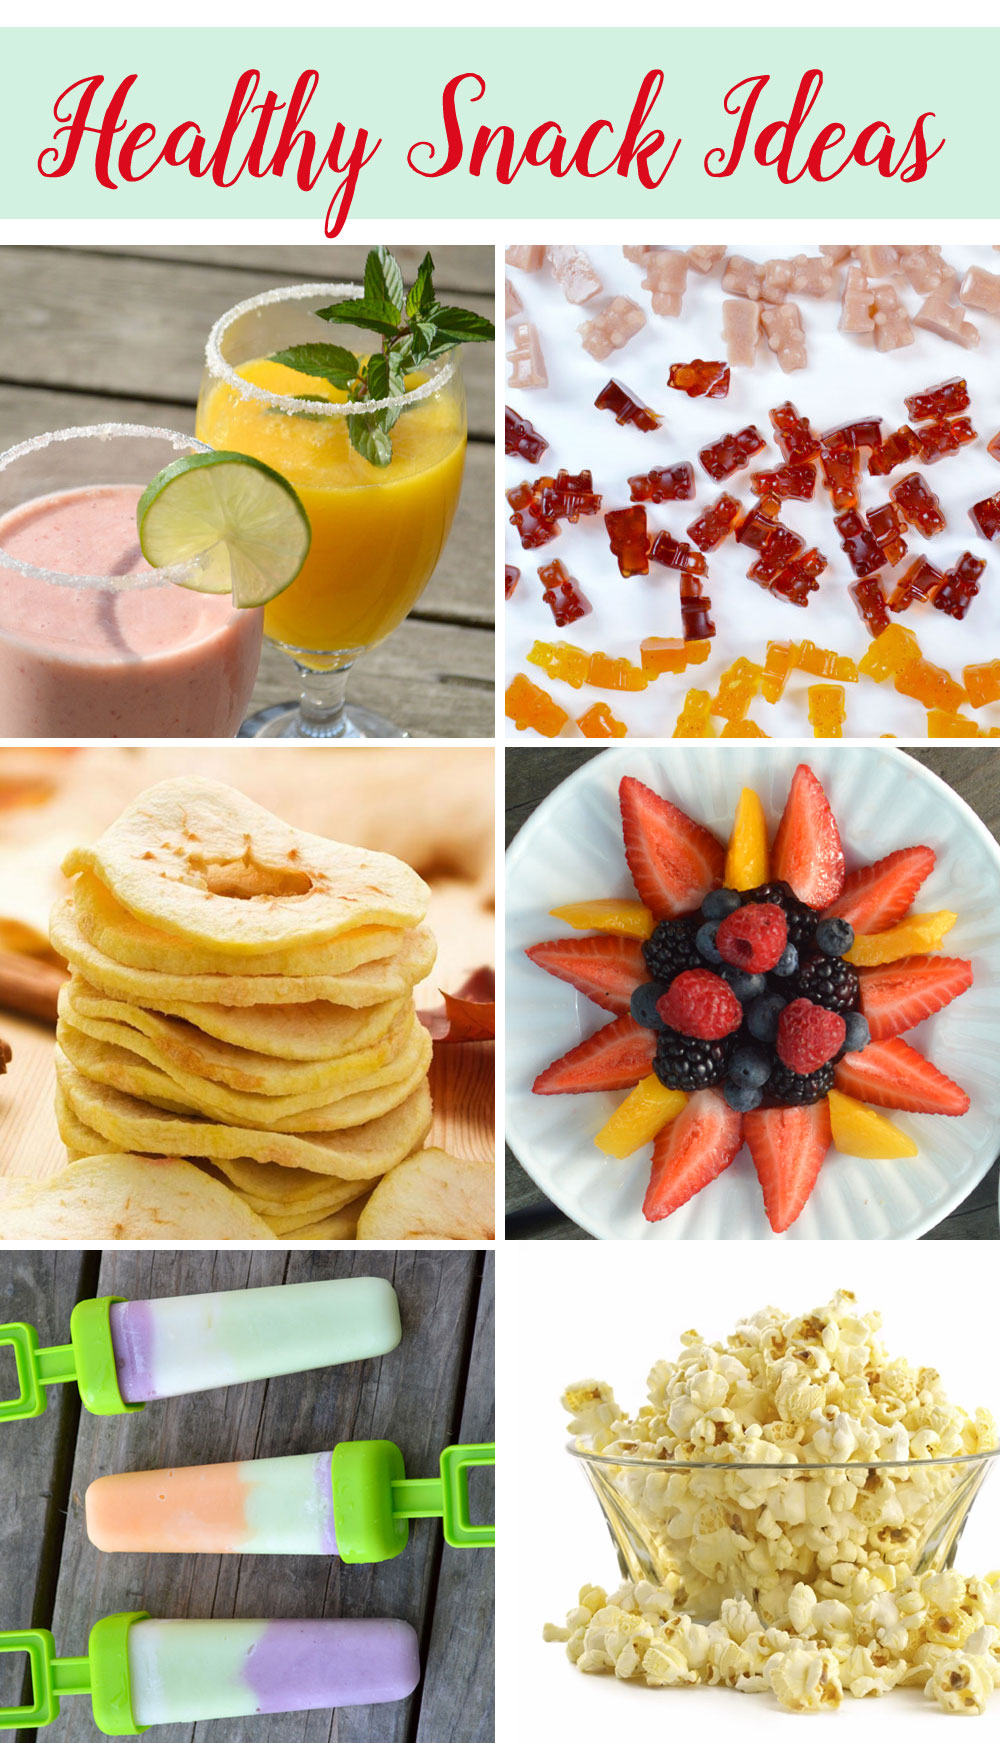 Healthy Snack Ideas for kids